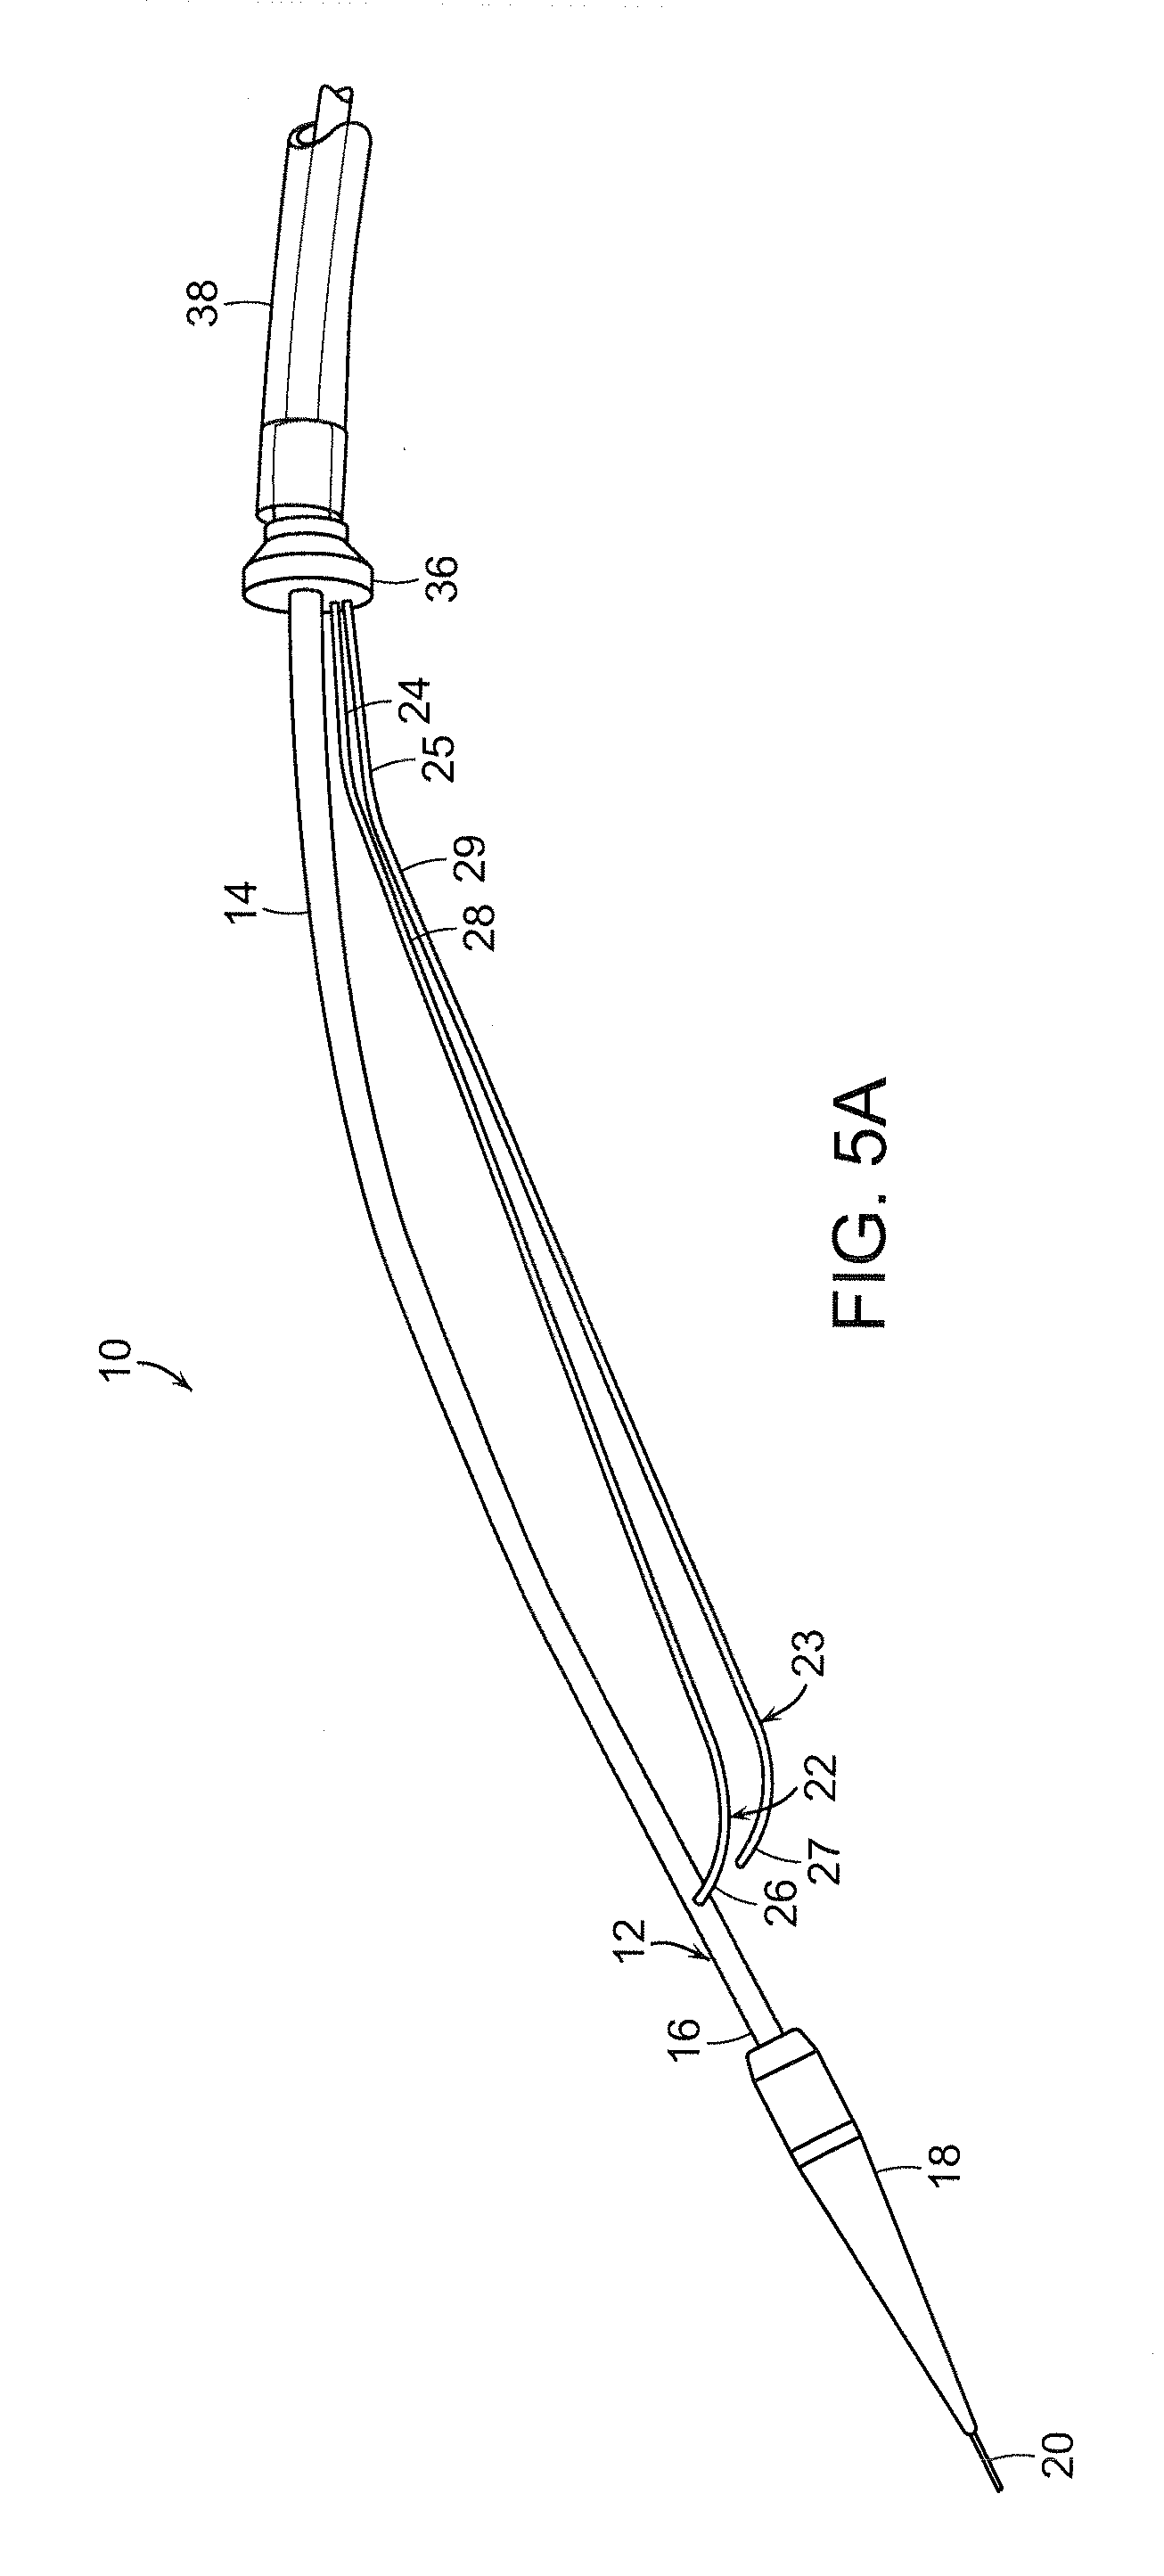 System and method for deploying an endoluminal prosthesis at a surgical site